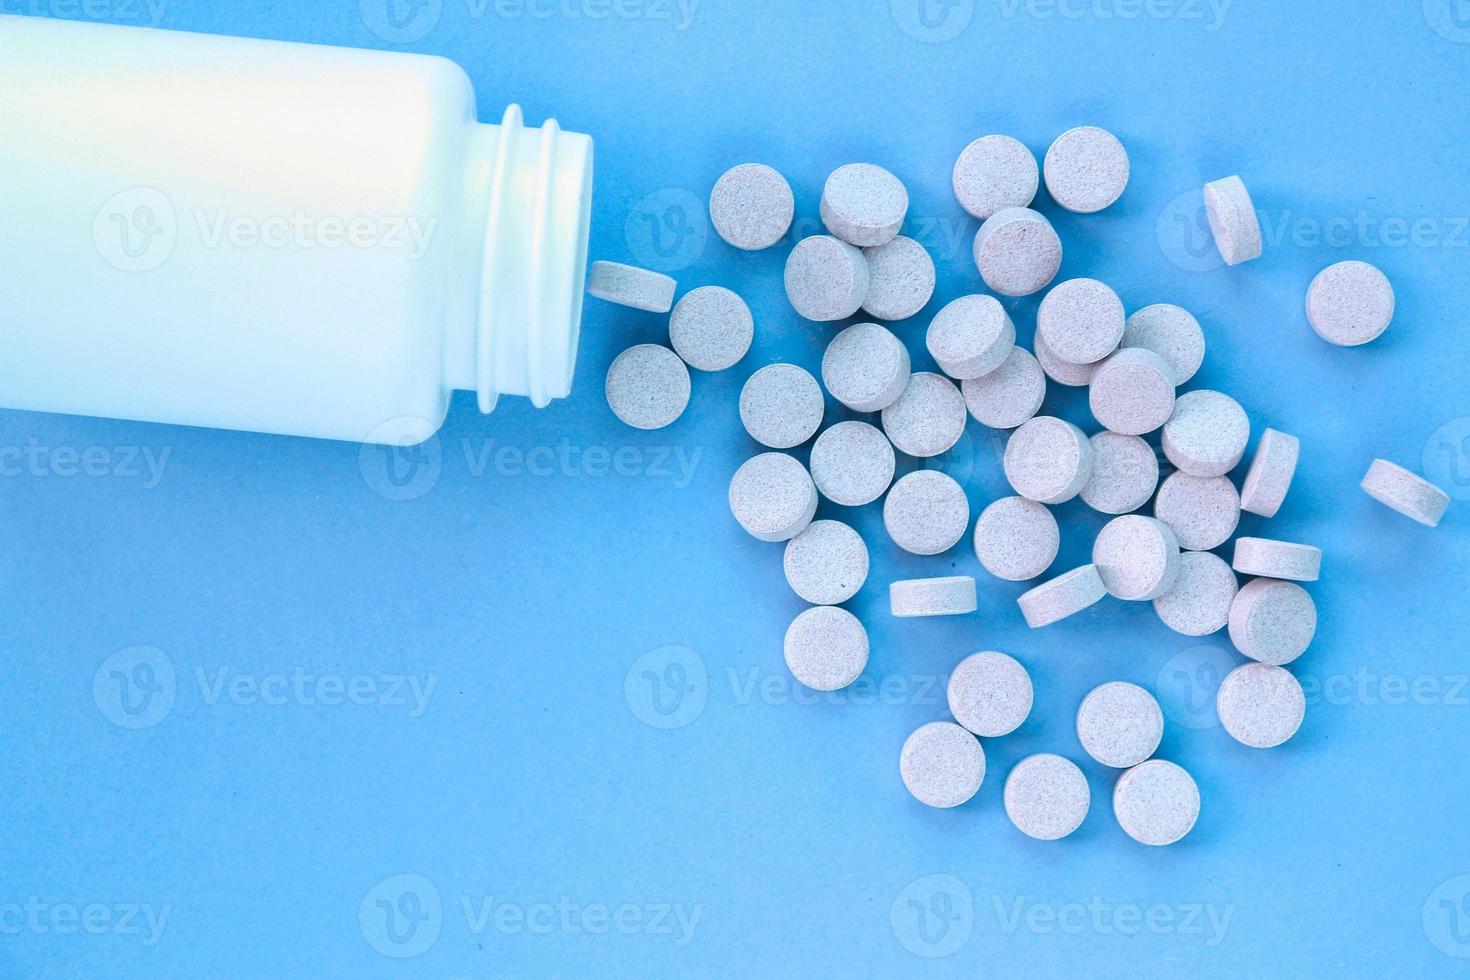 Tablets, capsule, pills and white plastic pack on blue background. Vitamin prescription supplement, drugs, Pharmaceutical medicine health therapy idea. Suicide abuse overdose concept. Doping steroid photo